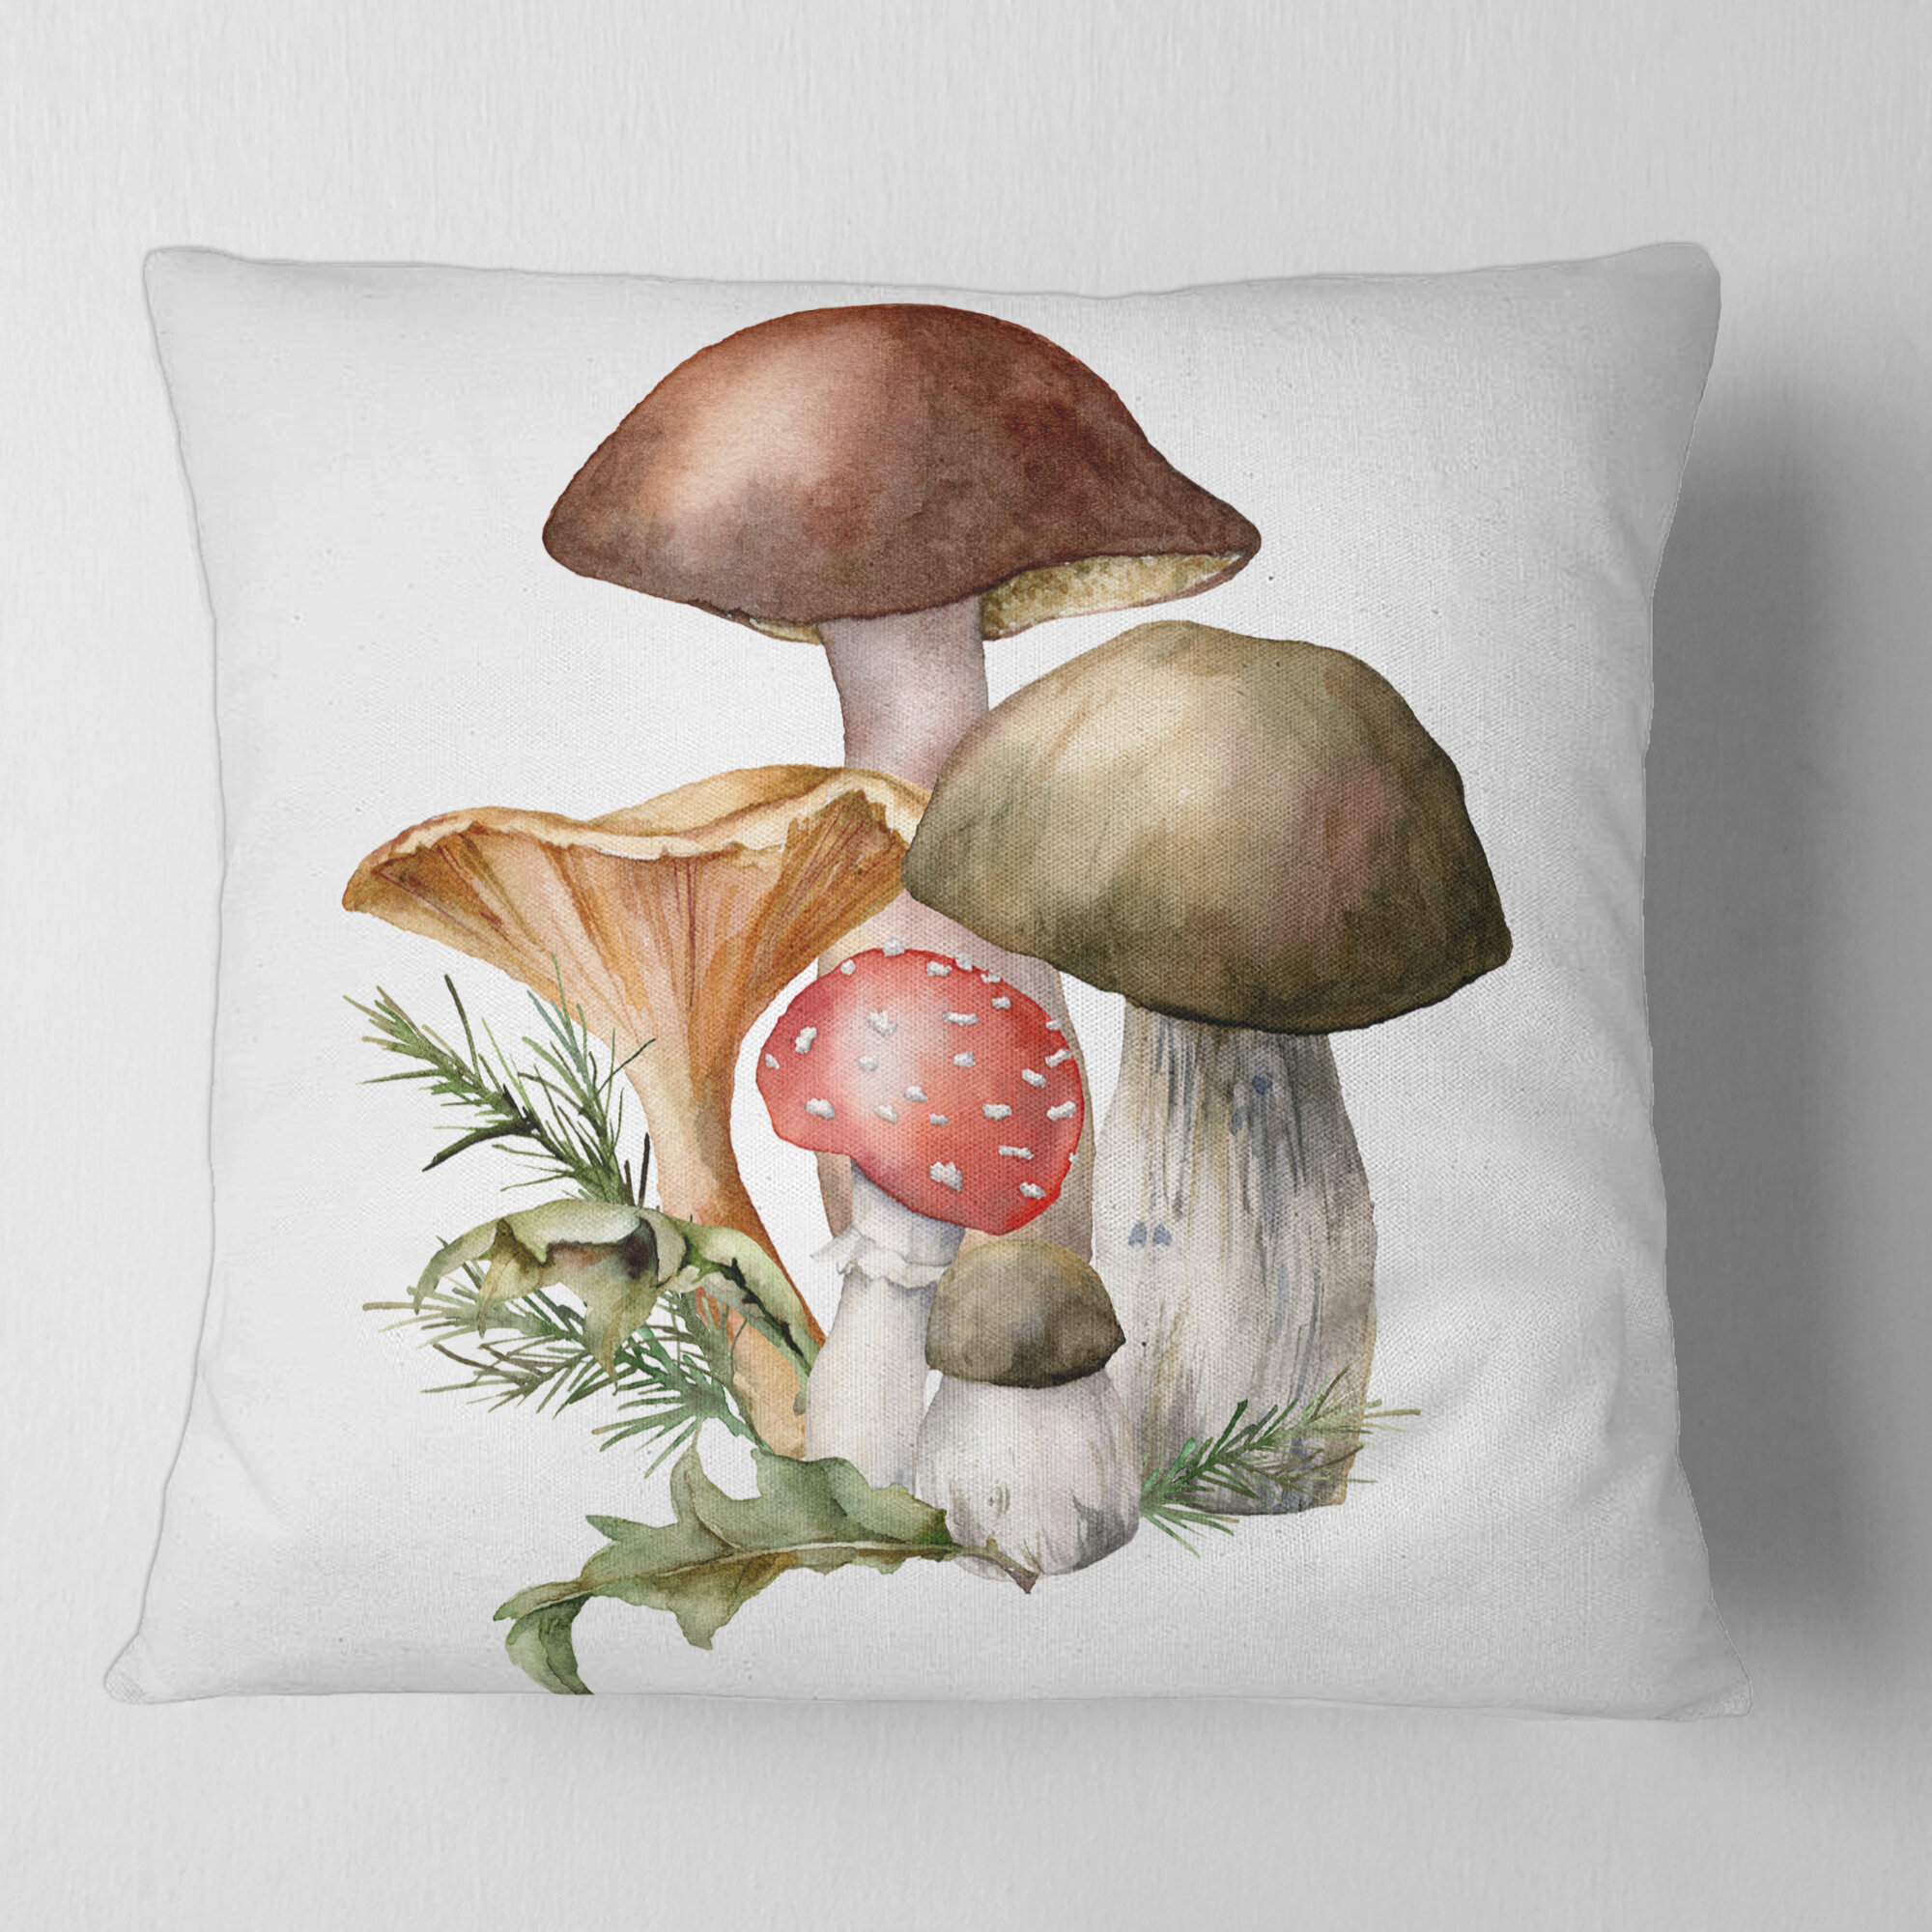 Red Little Mushroom Cotton Linen Throw Pillow Covers Square Home Decorative Cushion Pillowcase 18×18 in 